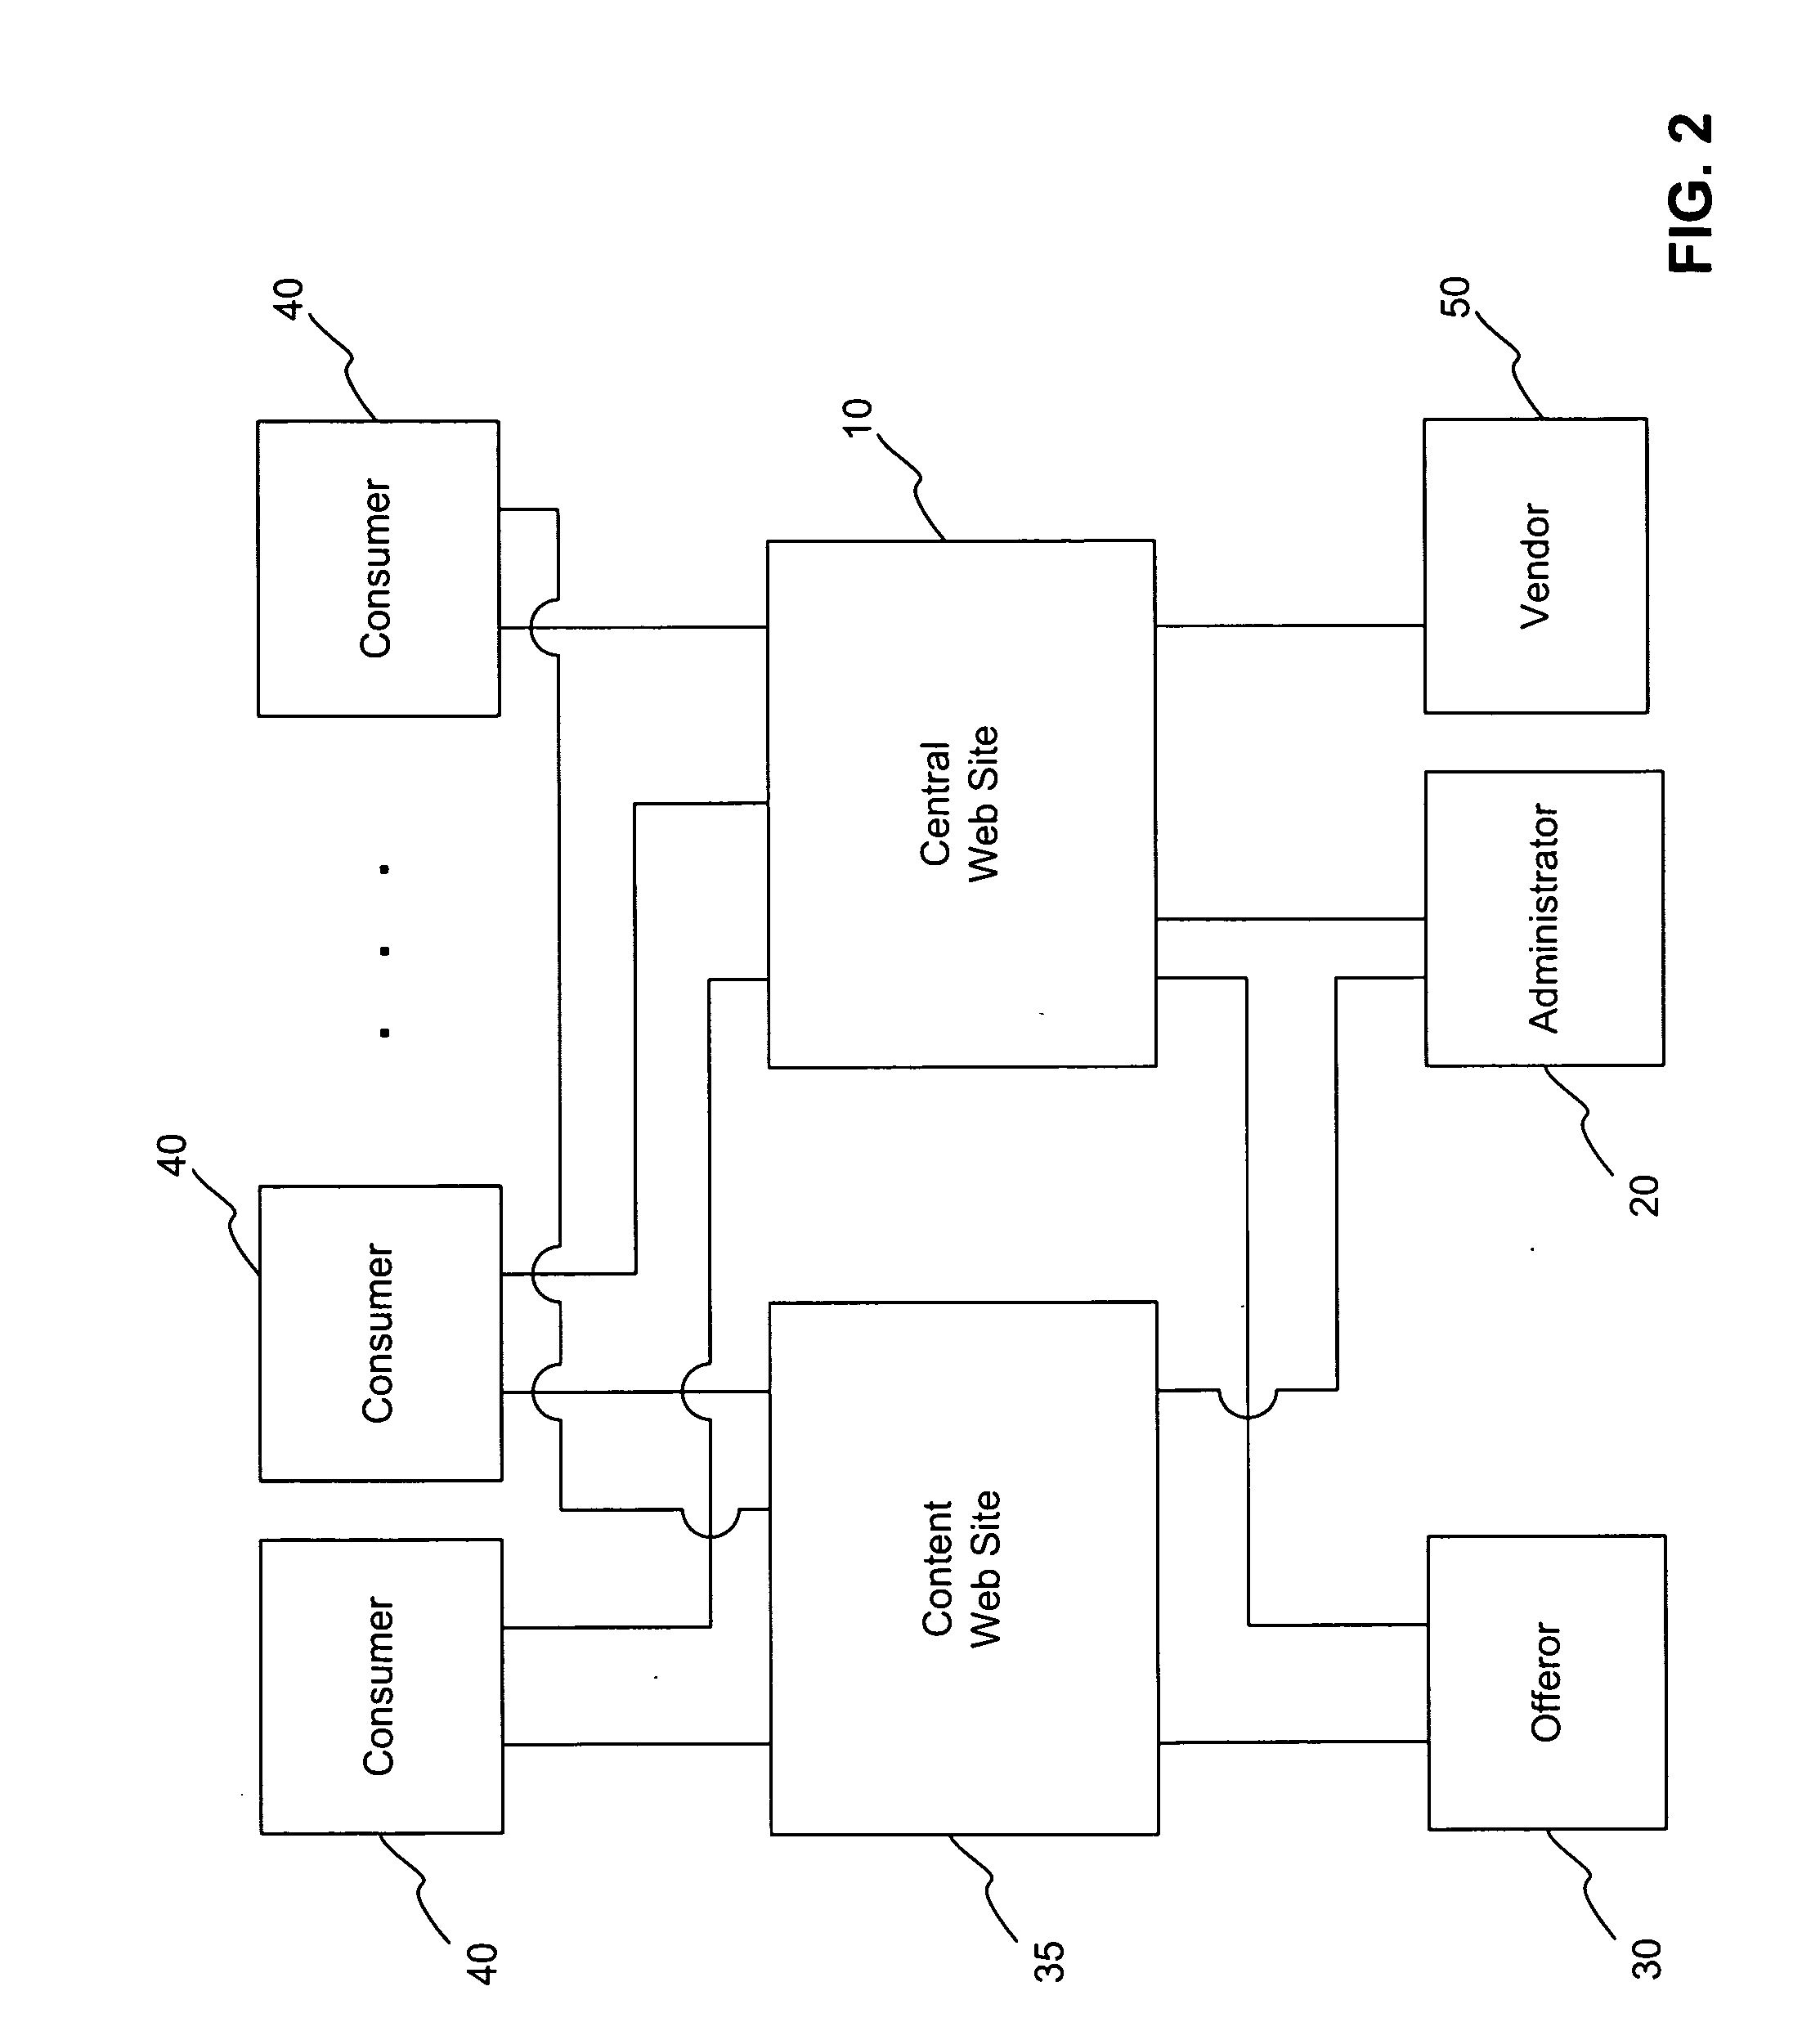 Methods and systems for generating product offers over electronic network systems